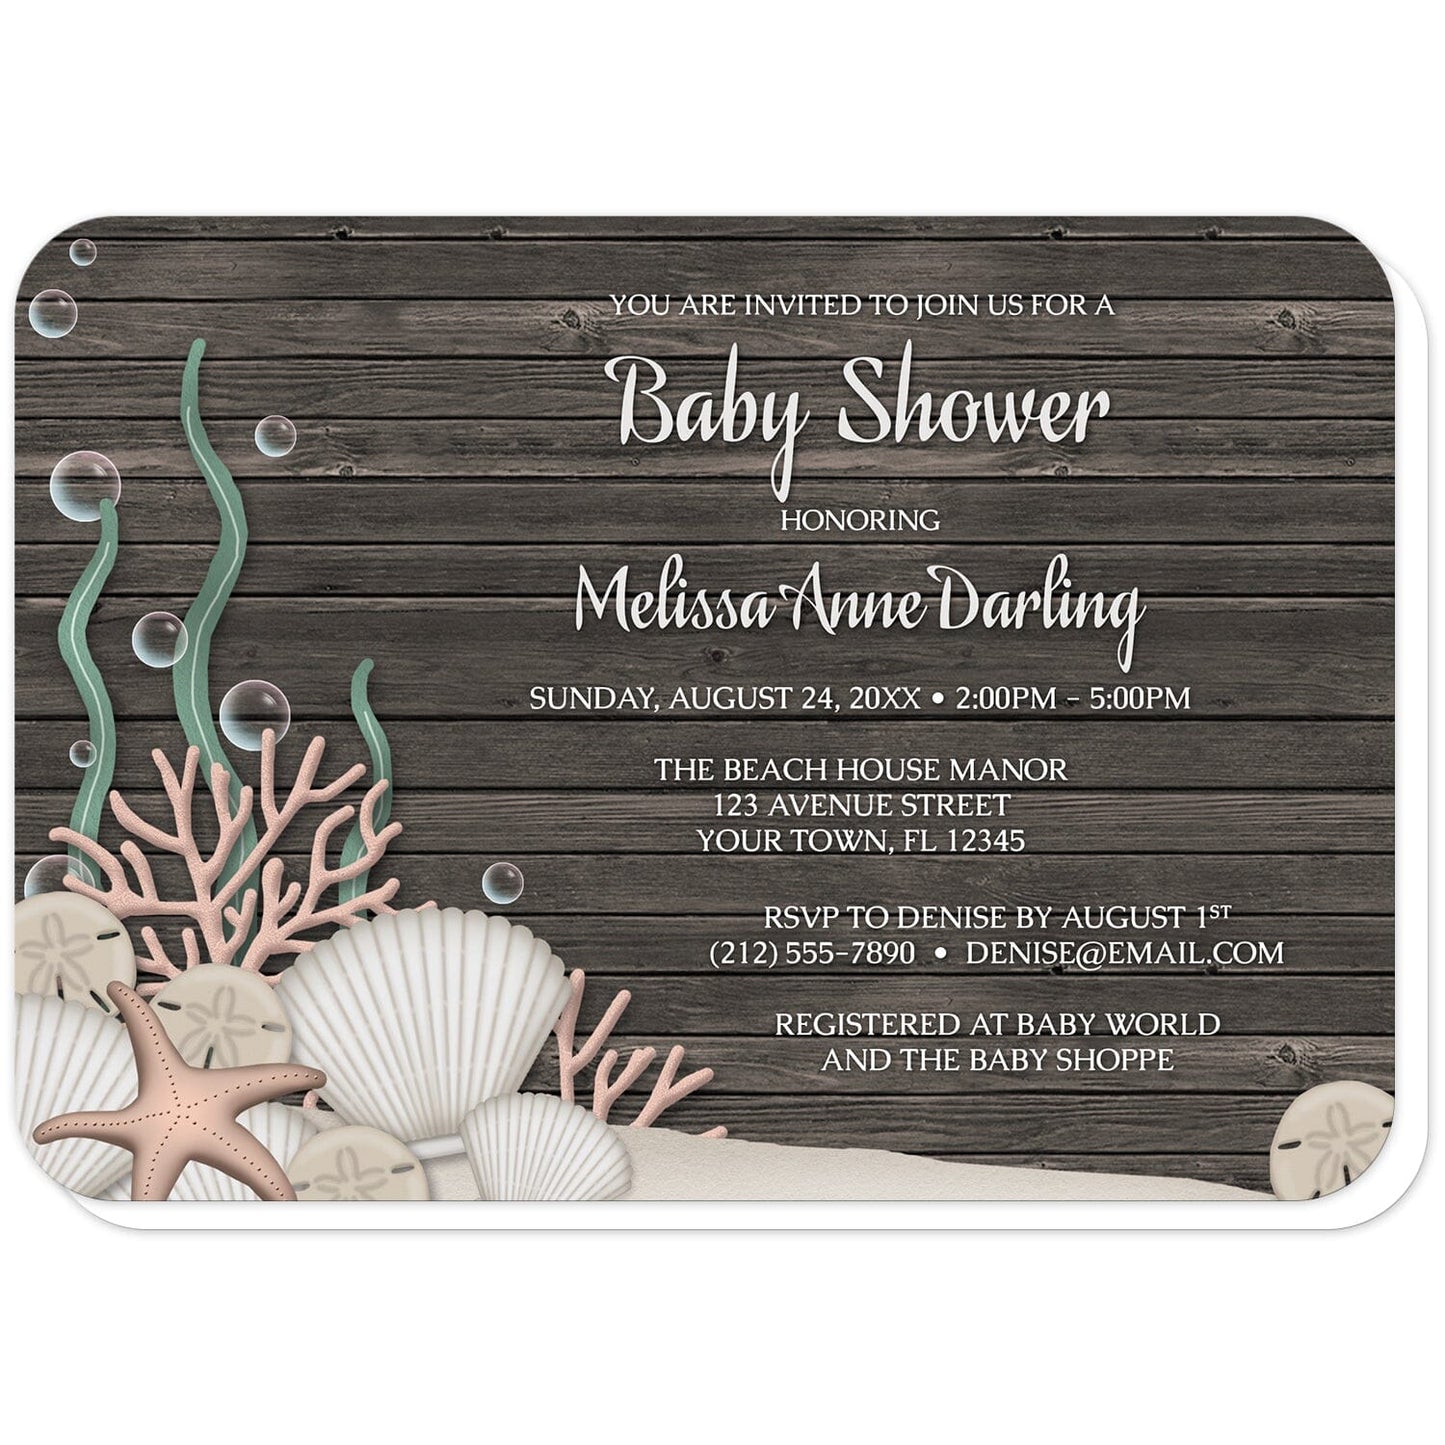 Rustic Beach Seashells and Wood Baby Shower Invitations (with rounded corners) at Artistically Invited. Rustic beach seashells and wood baby shower invitations with a rustic "on the beach" or "under the sea" theme. They are designed with a dark wood pattern, sandy seabed, assorted seashells, coral, and kelp. Your personalized baby shower celebration details are custom printed in white over the wood background.